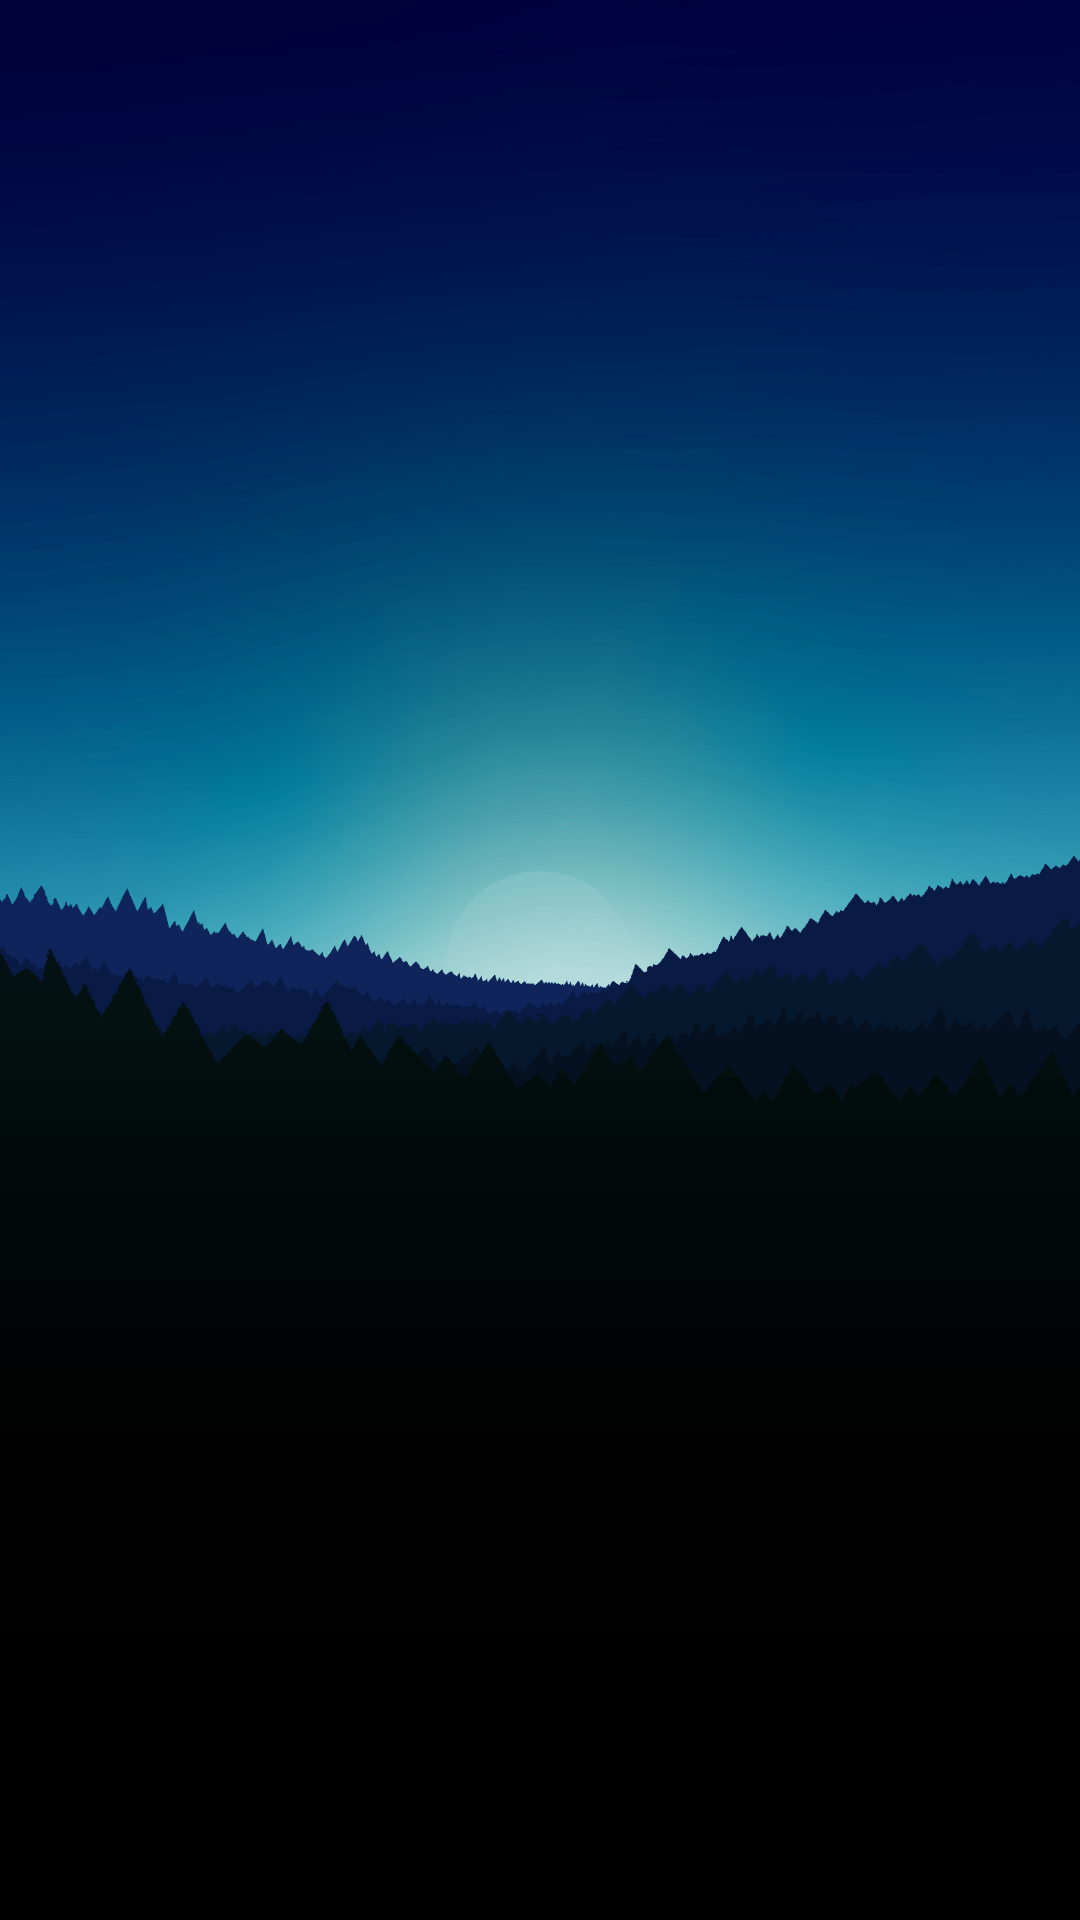 A dark blue and black image of a mountain range at night - Minimalist